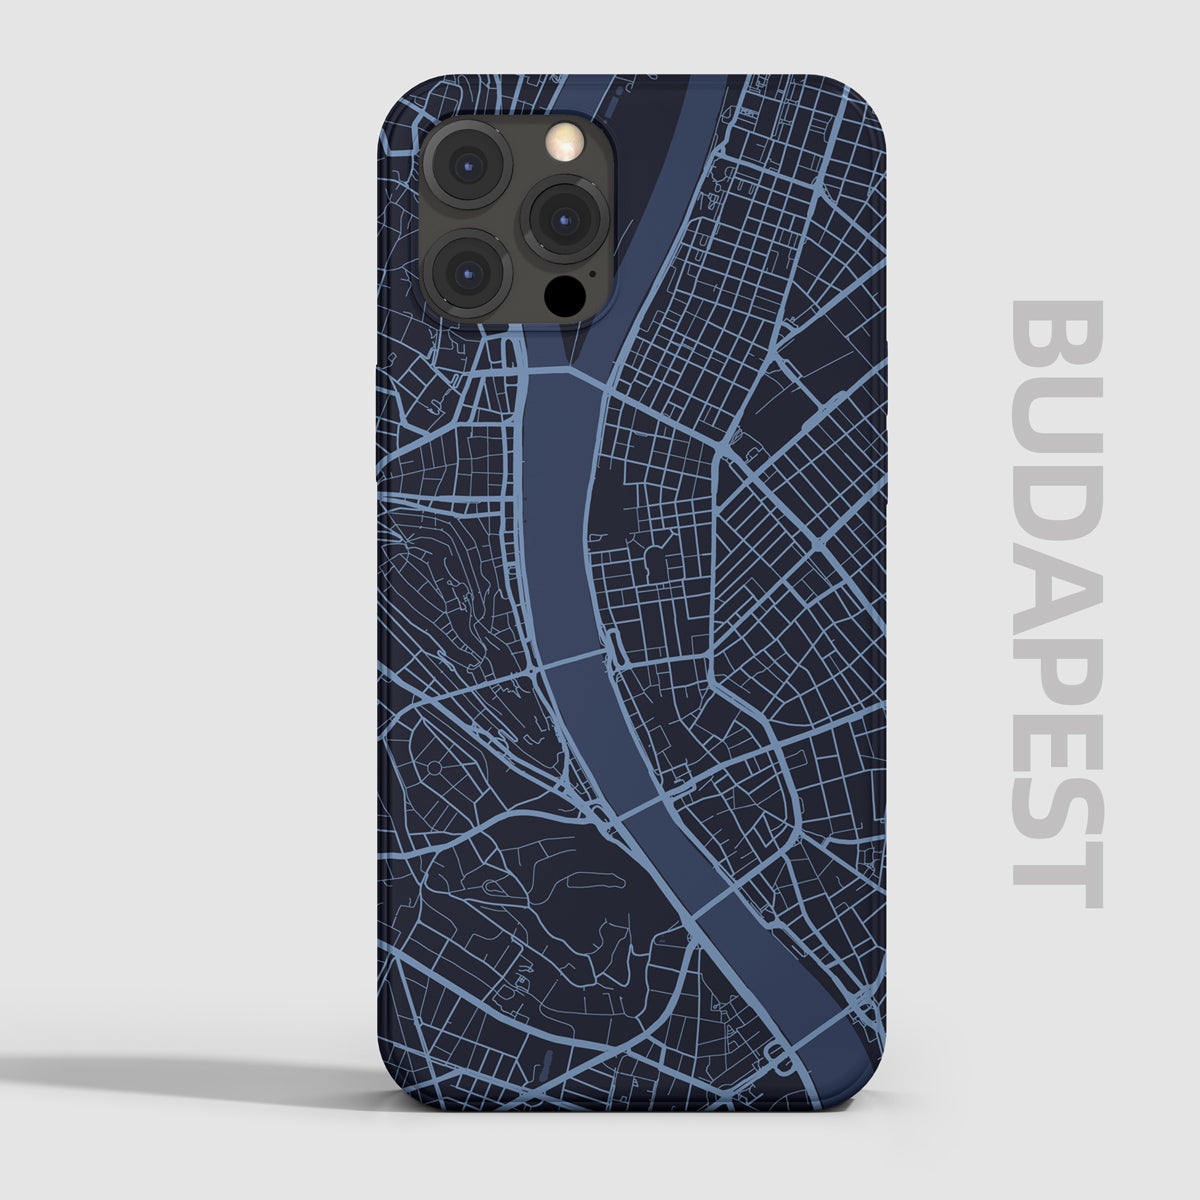 Budapest Hungary Phone Case city map landscape. Apple Huawei XIiaomi iPhone Android Samsung